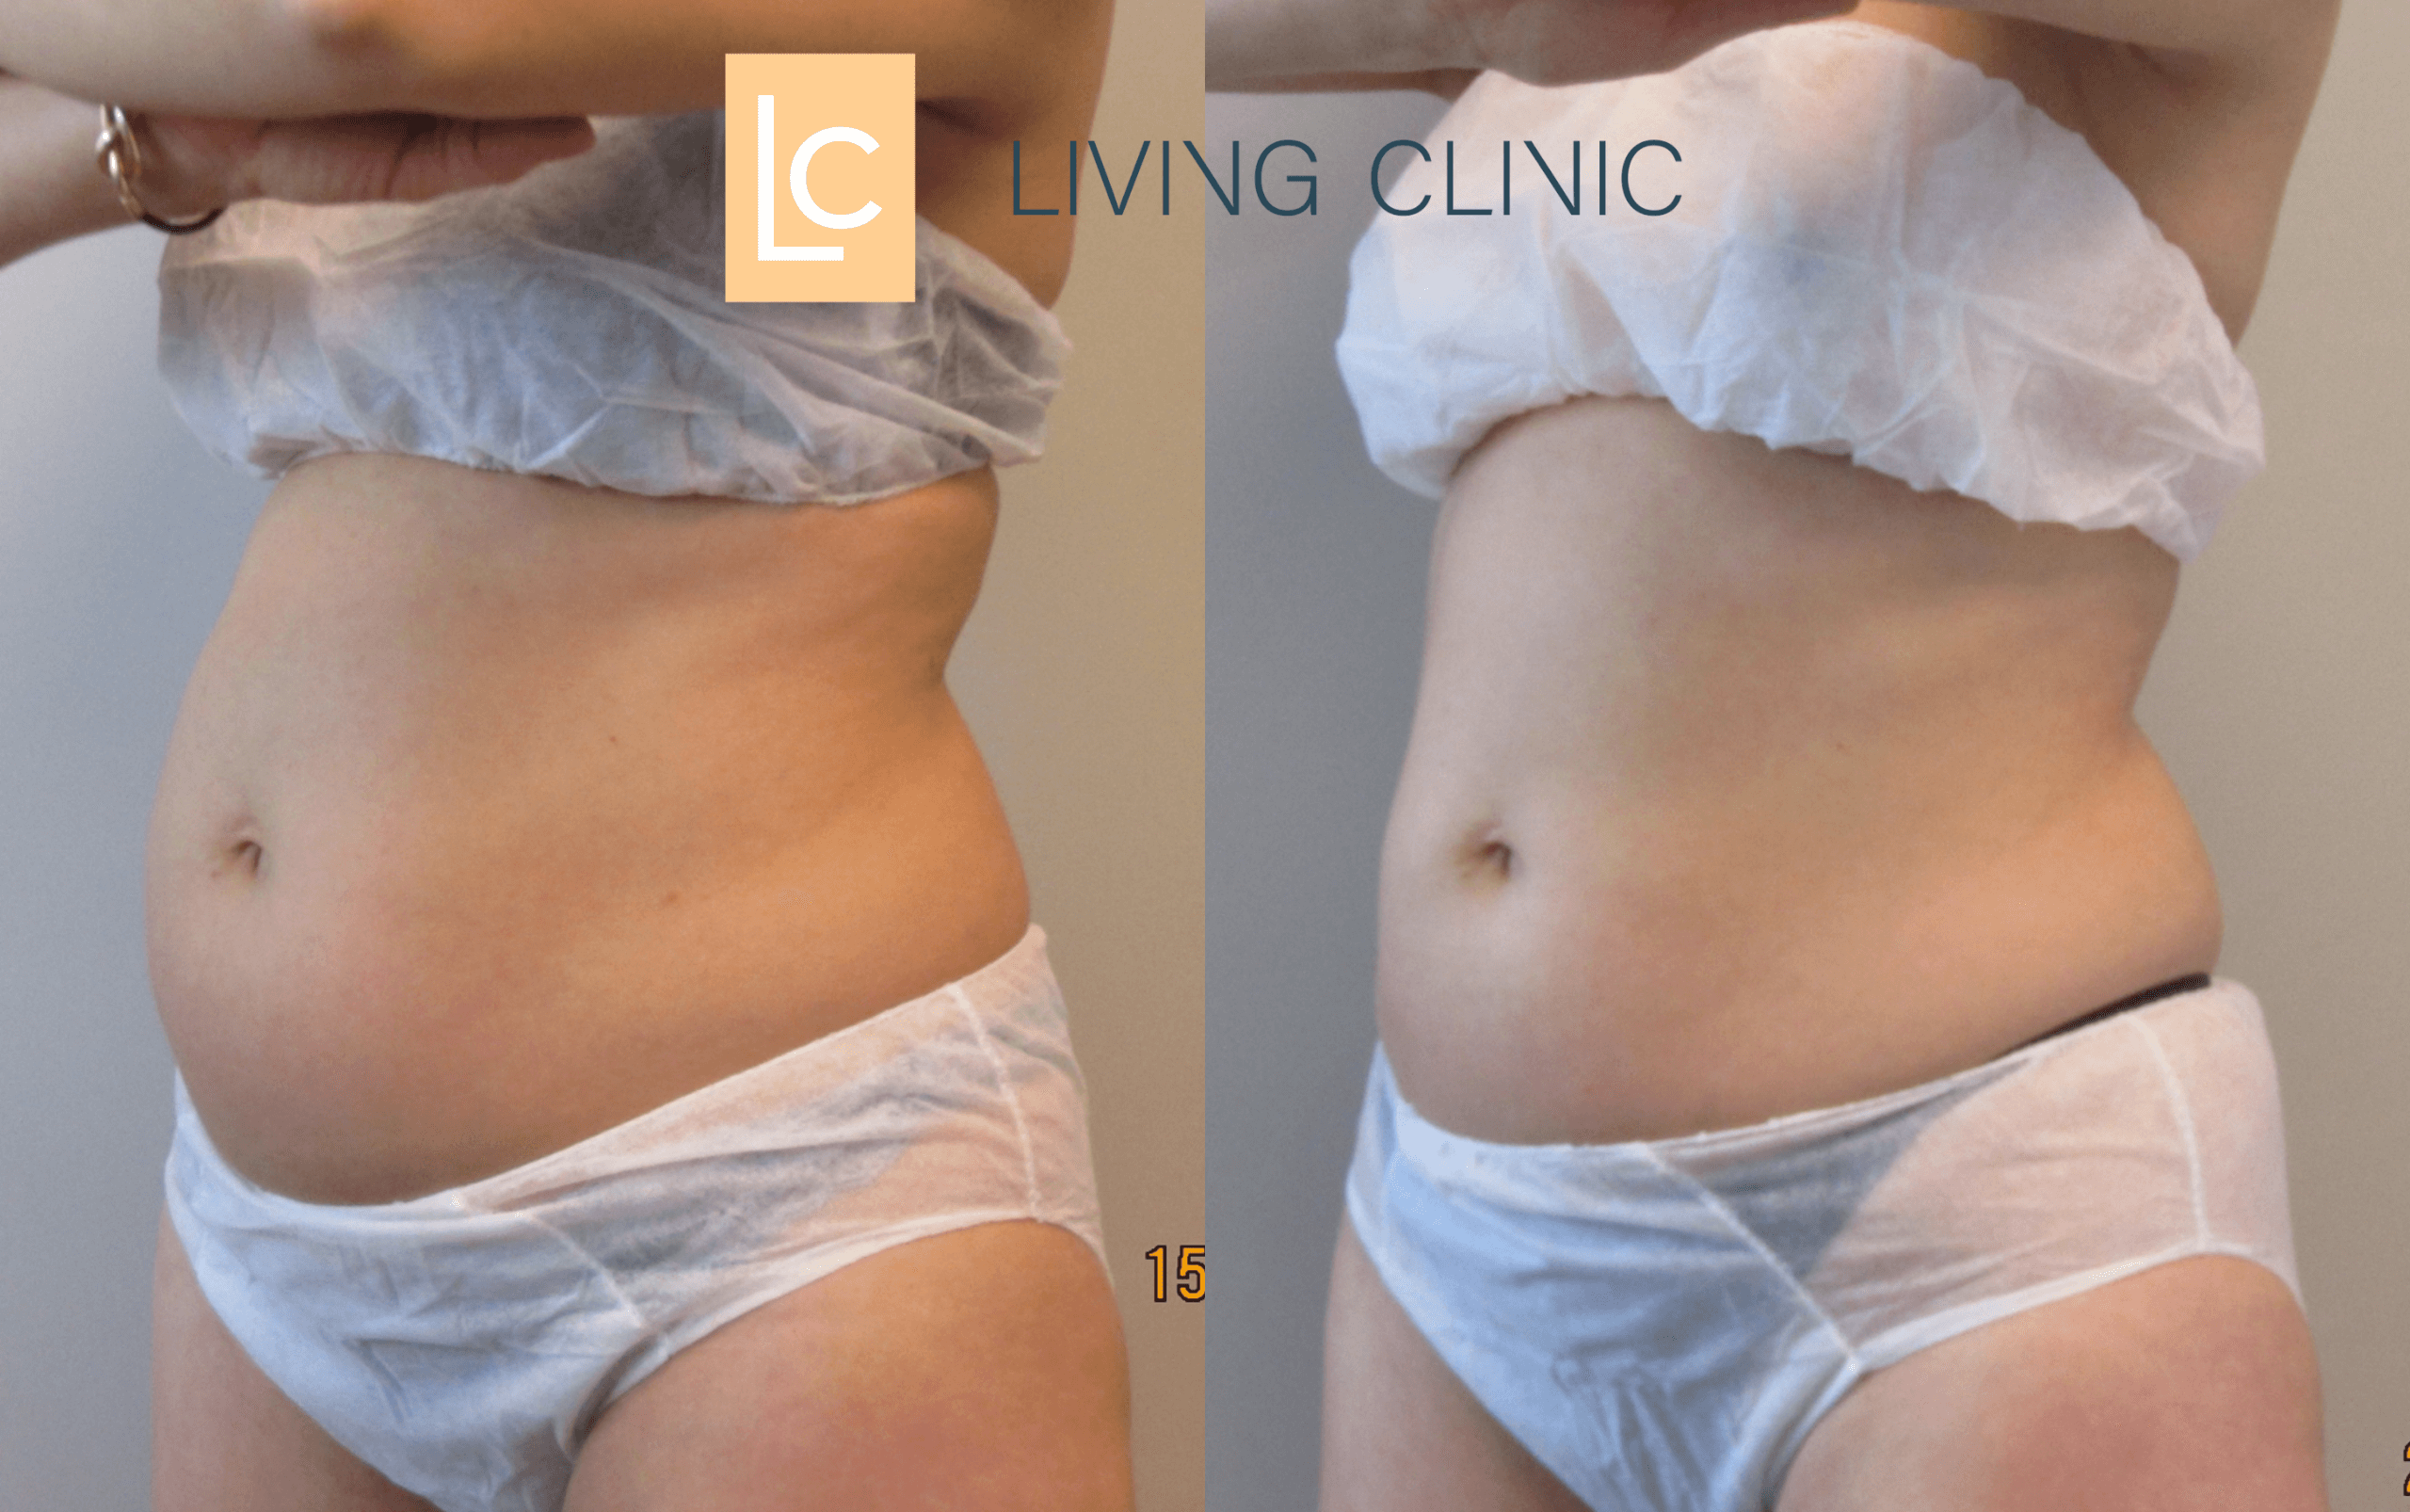 35 year old Female Abdomen Coolsculpting Cryolipolysis Results